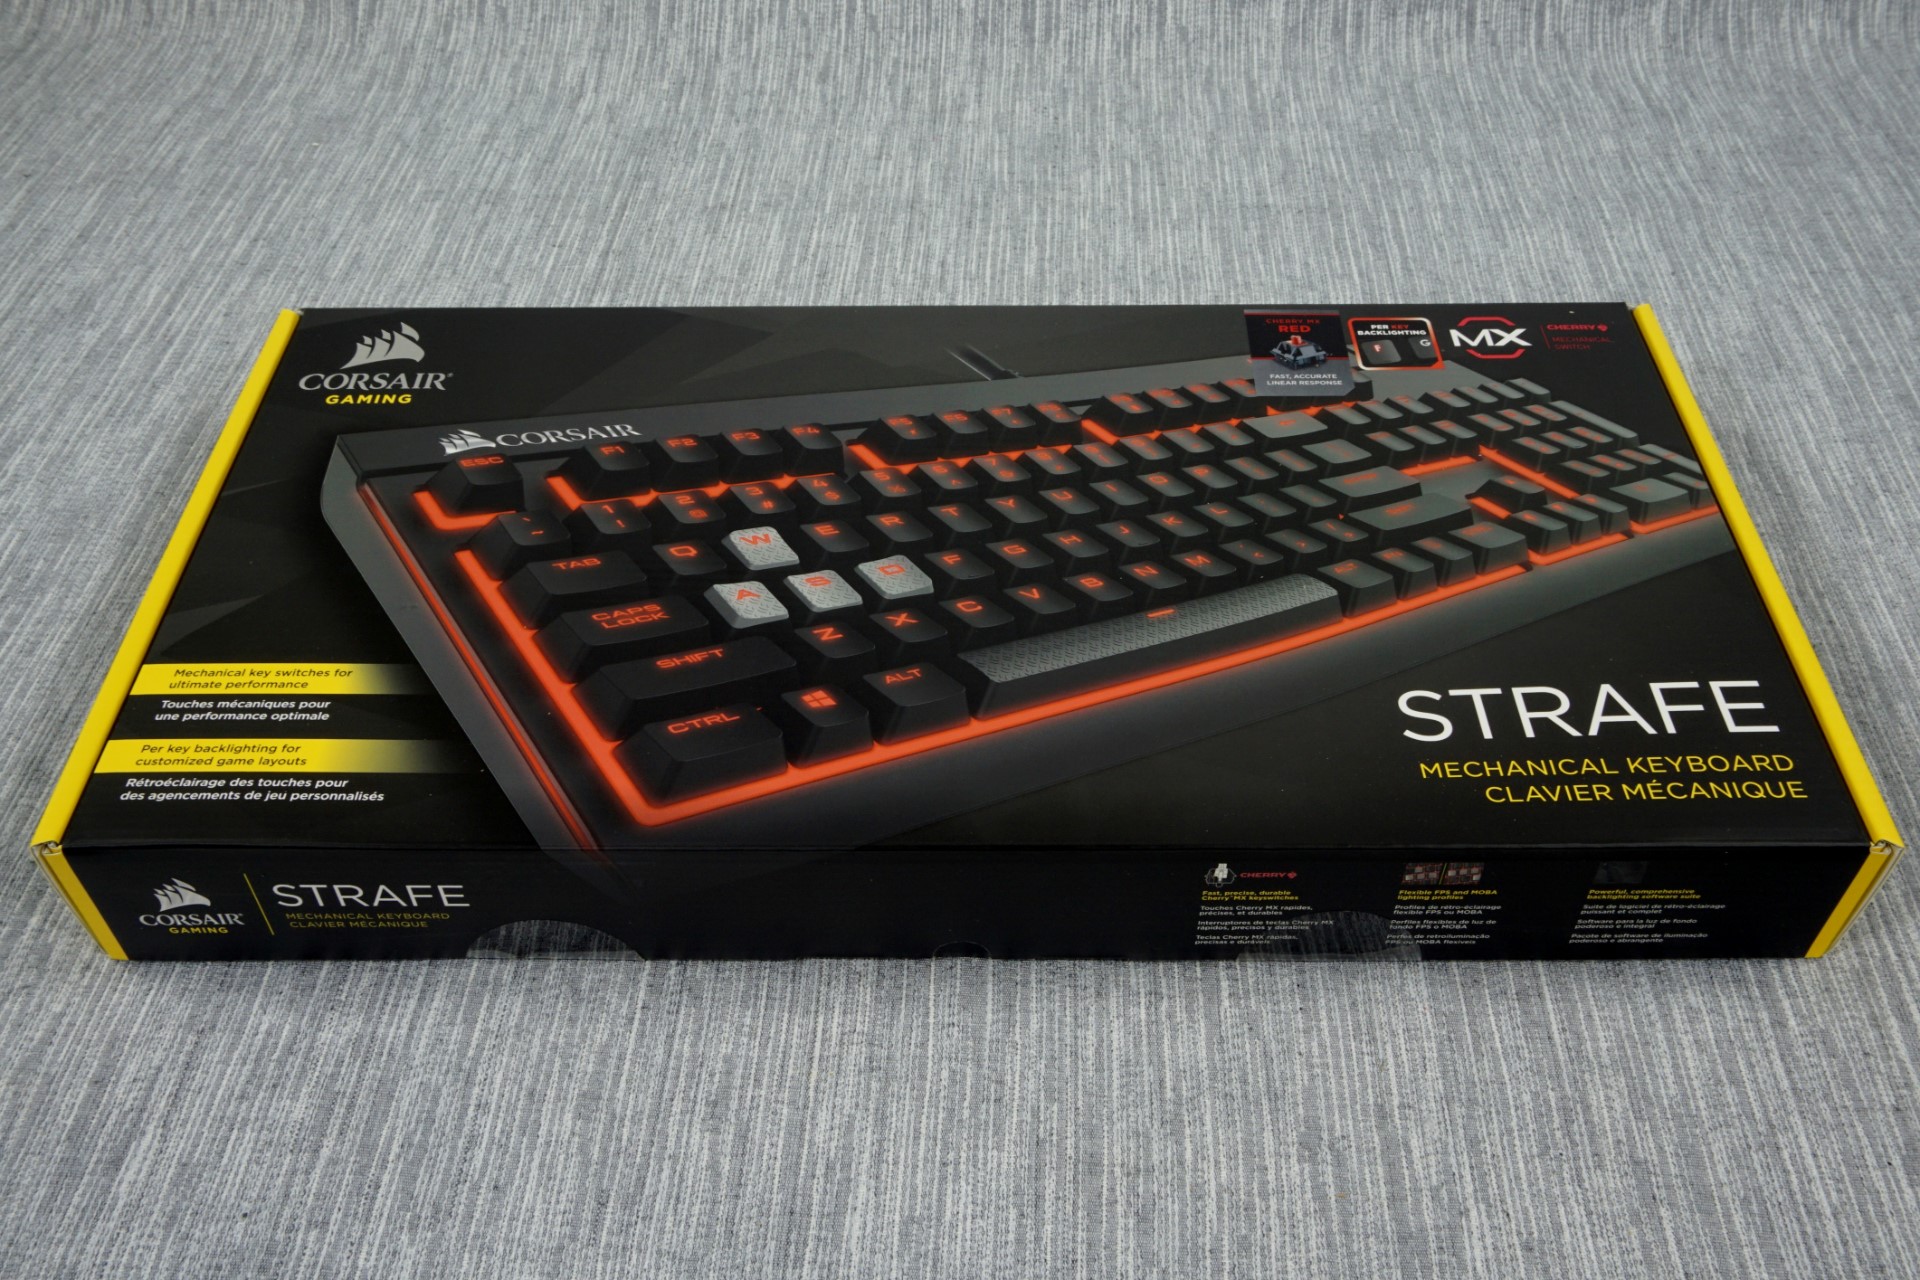 The Corsair STRAFE Mechanical Keyboard Review